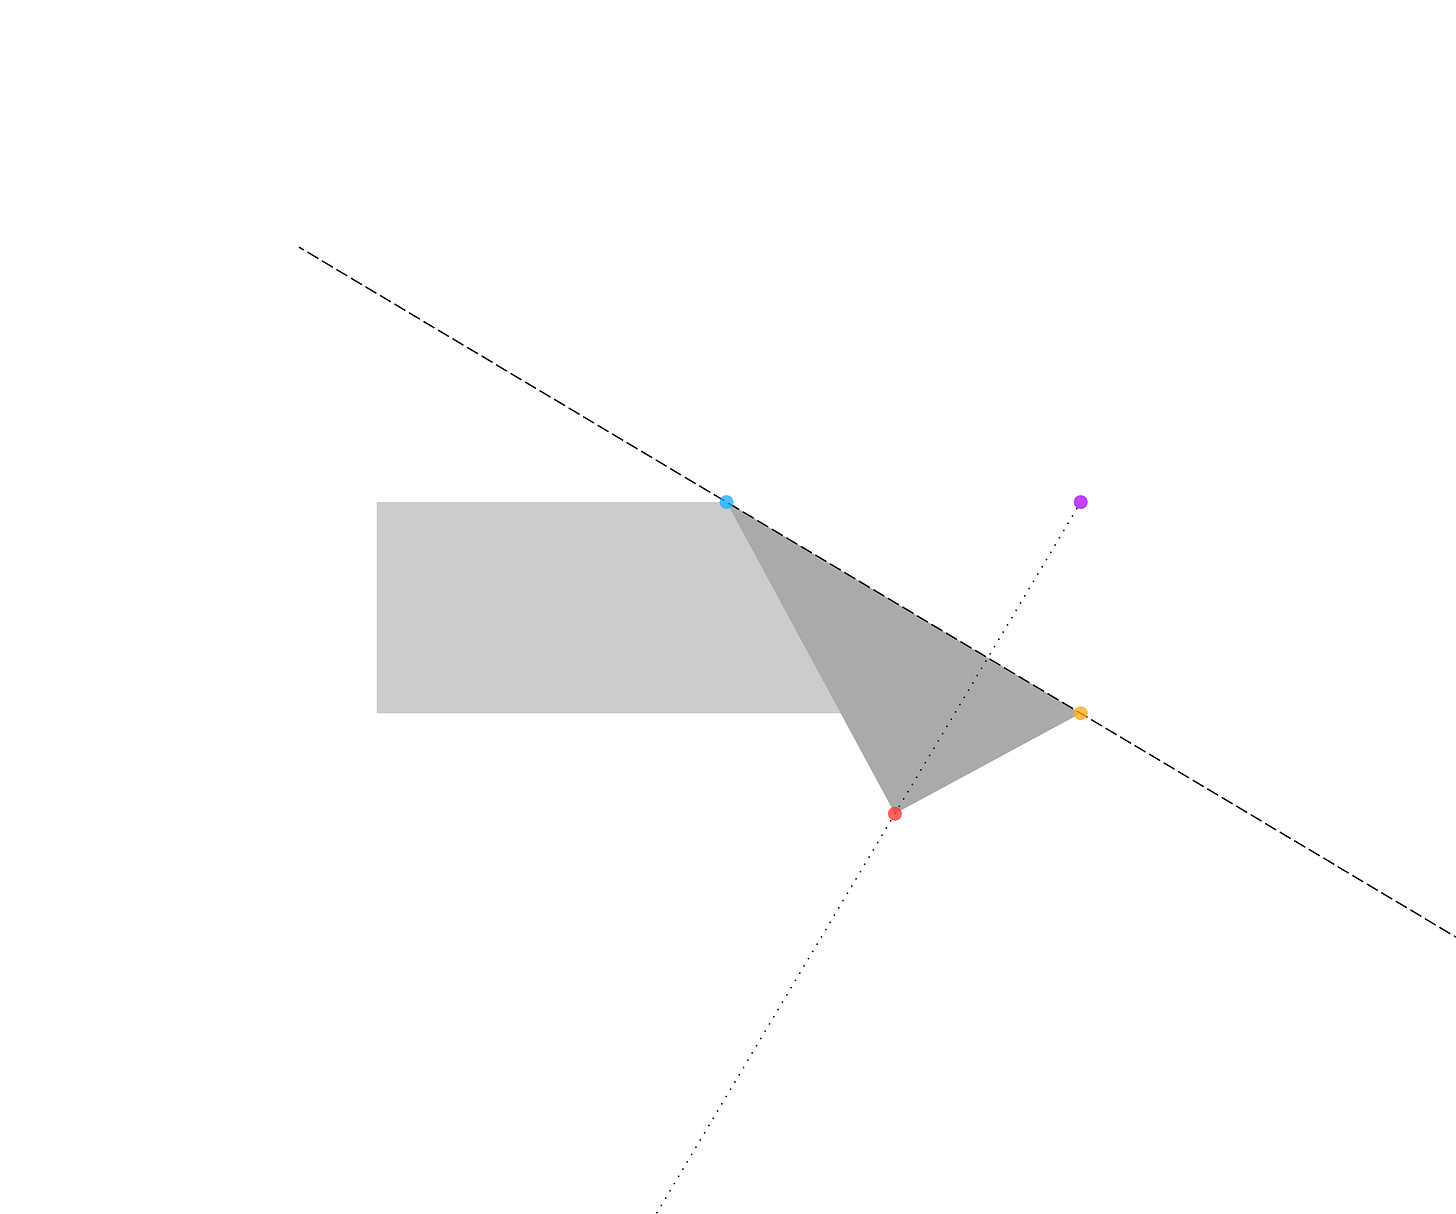 Abstract geometric illustration with a solid gray triangle on a white background intersecting with a dashed black line that has colored dots at various points.